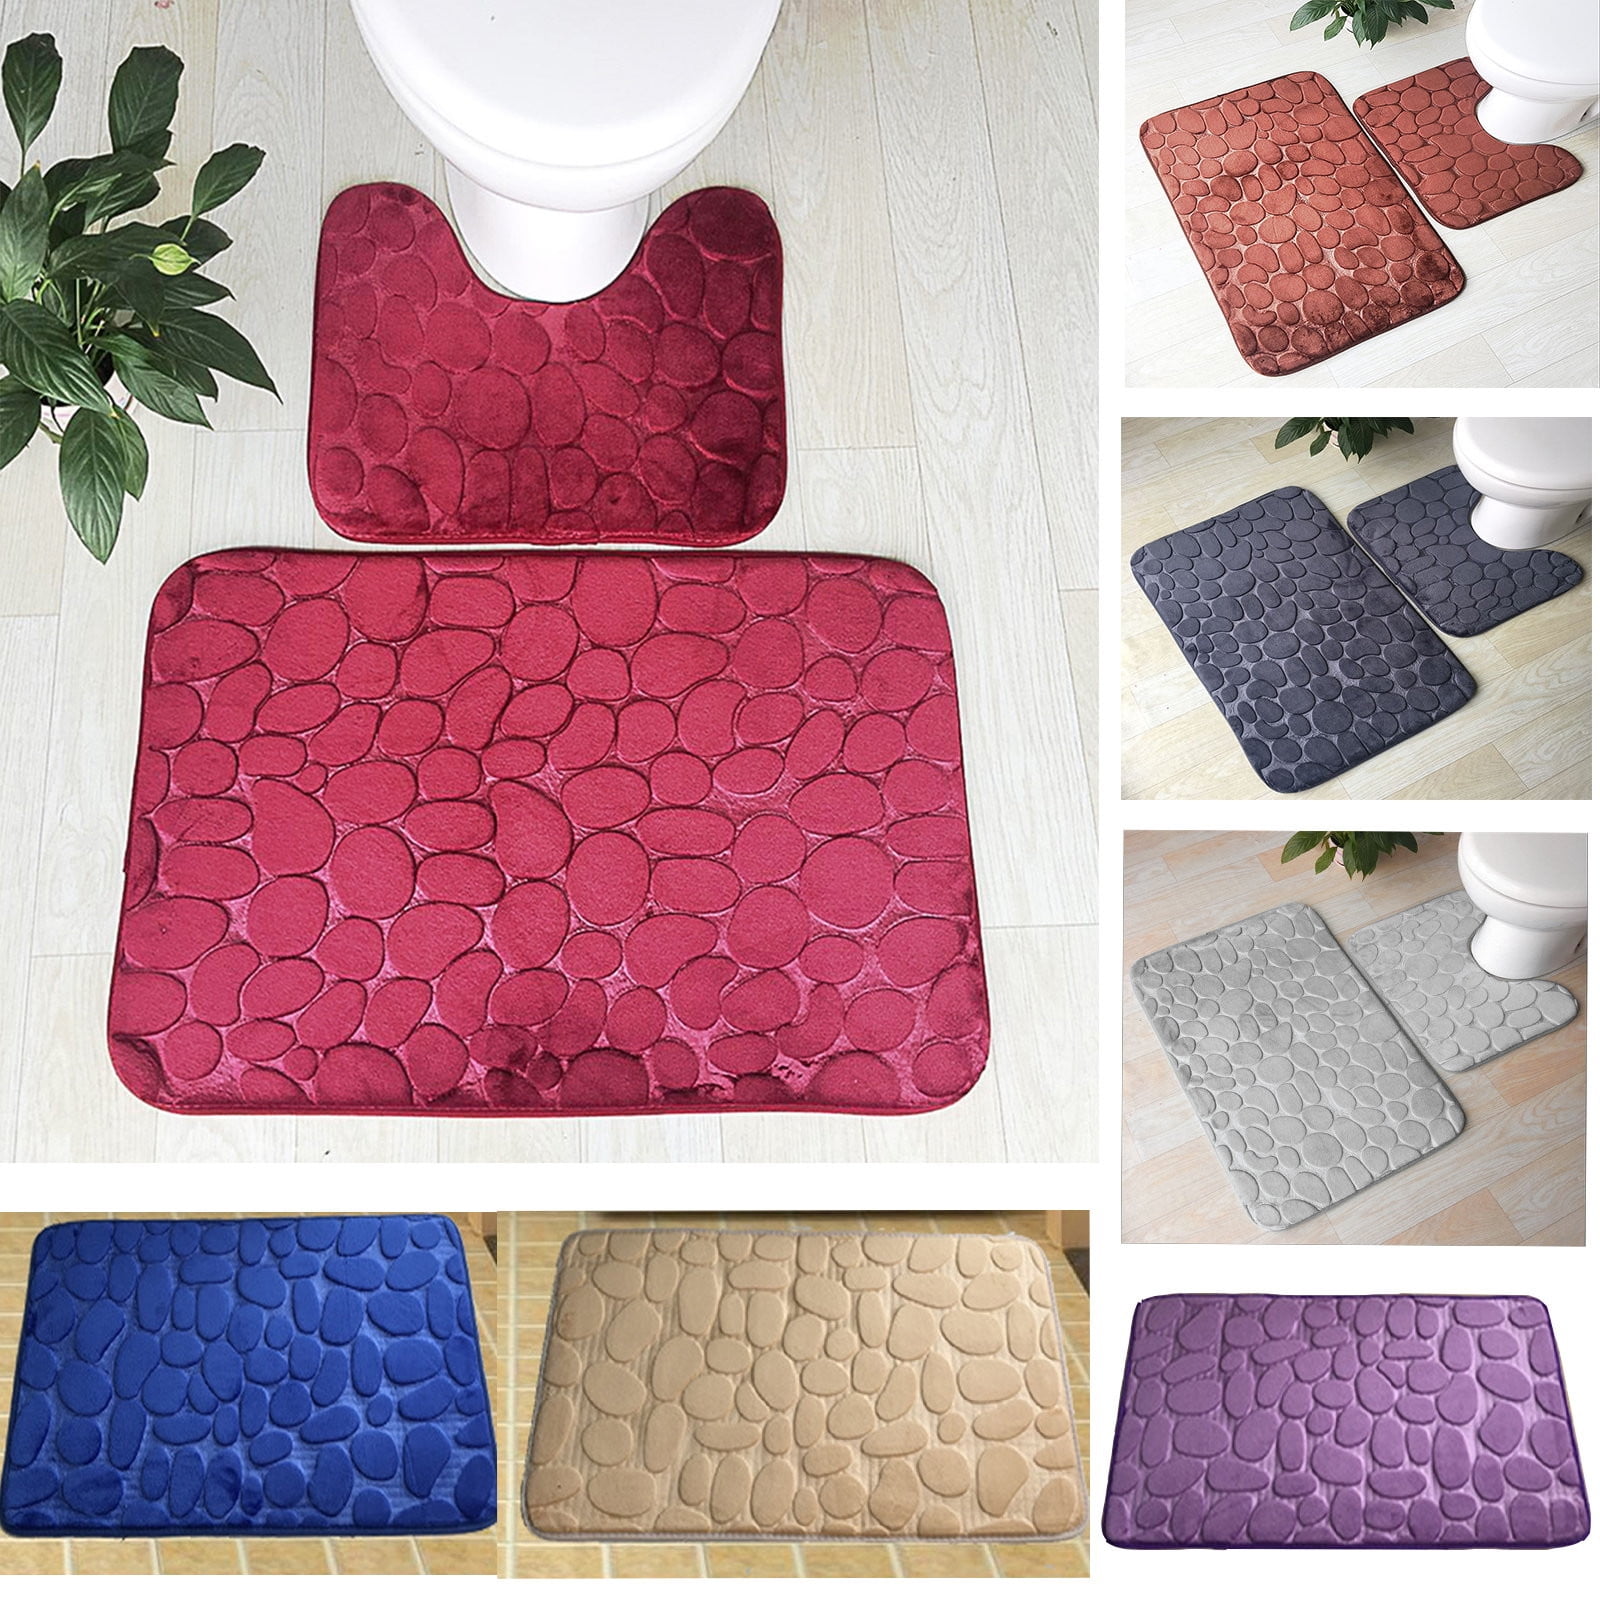 smiry Chenille U-Shaped Toilet Bathroom Rugs, Soft Absorbent Non-Slip  Contoured Rugs, Machine Washable Contour Bath Mats for Bathroom Toilet  (24x20